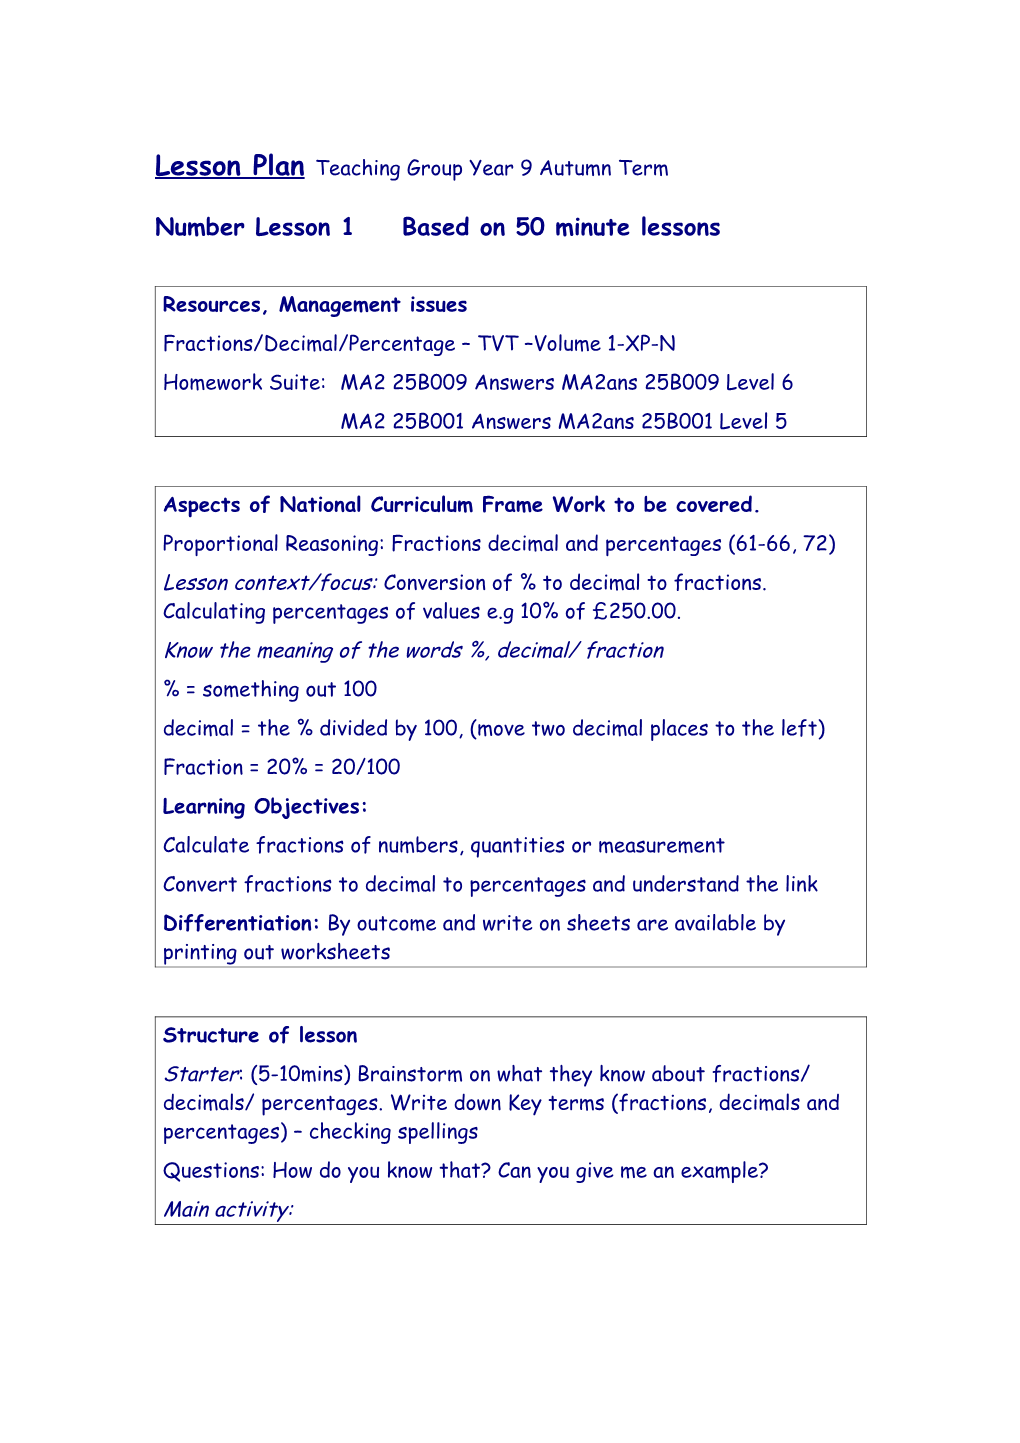 Number Lesson Plan 1 -Based on 50 Minute Lessons